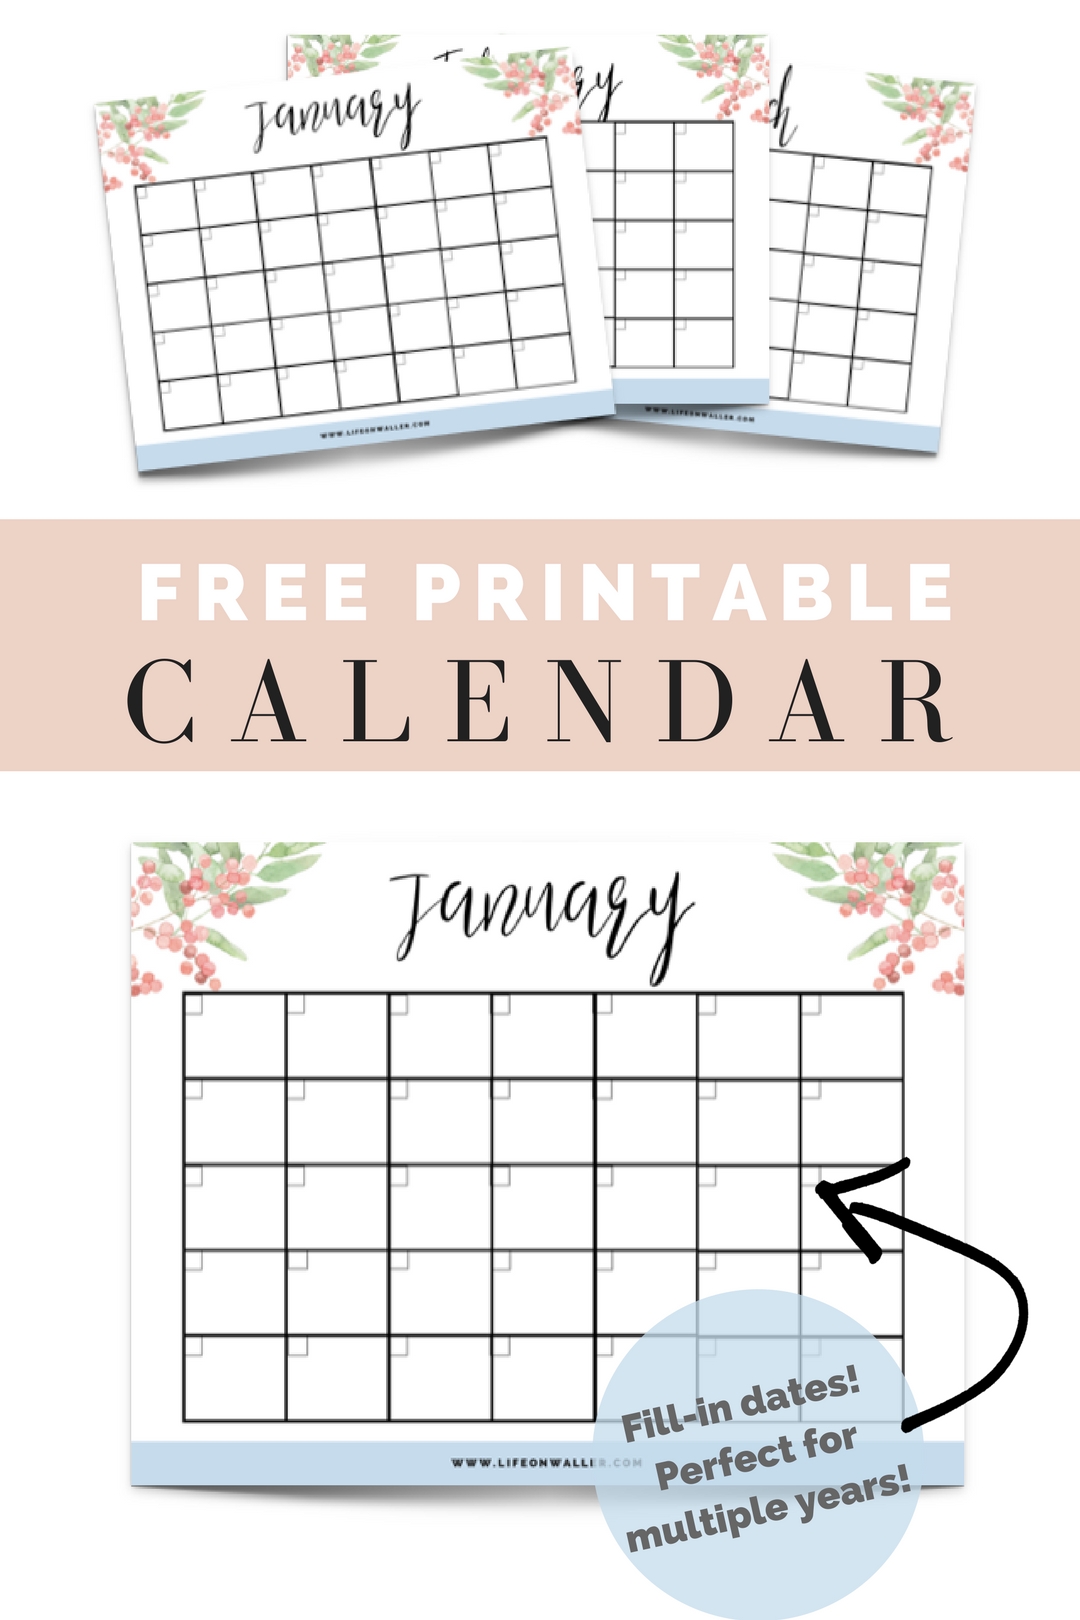 Free Printable Fill-In Floral Calendar | Free Printable Calendar, Calendar, Free Printables-Free Fill In Printable Calendar